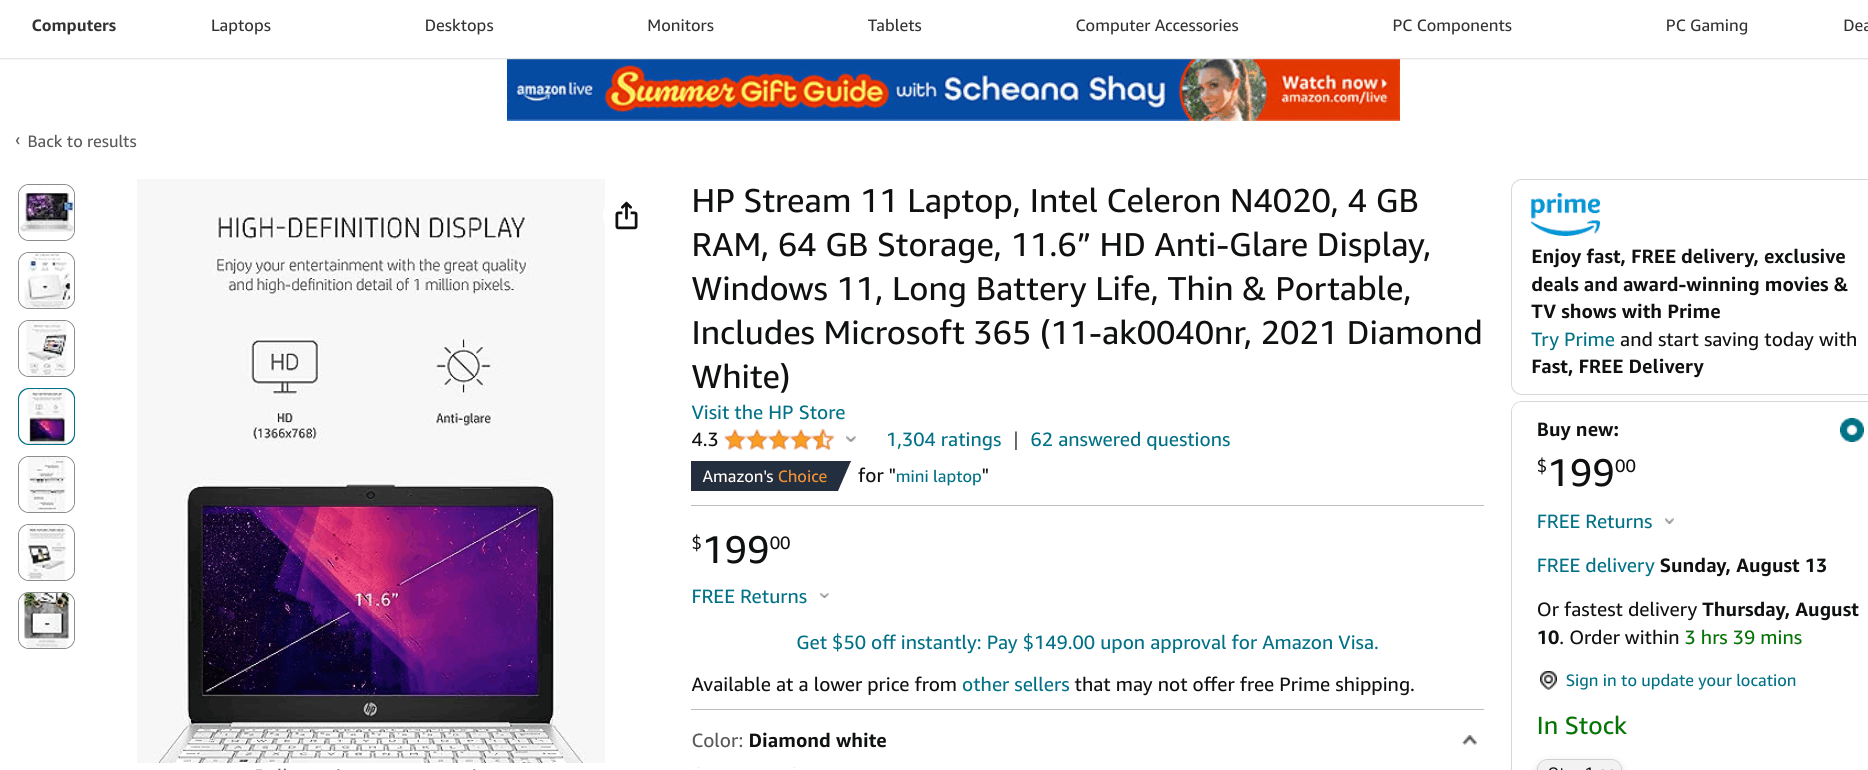 would this laptop run roblox STUDIO?? (specifically studio) and if -  Microsoft Community